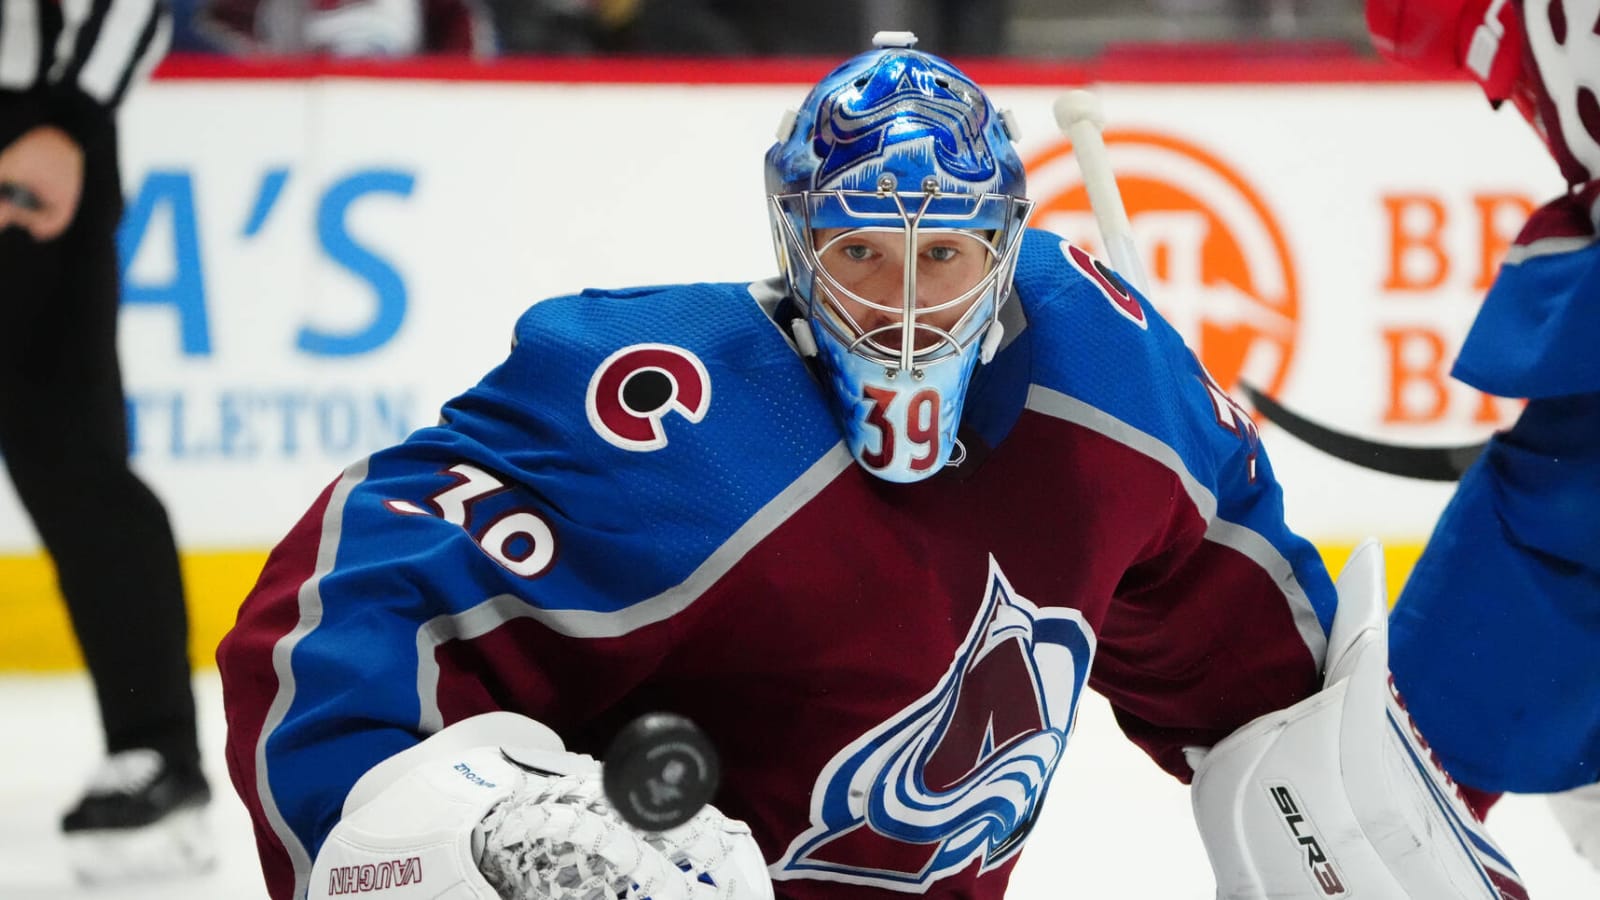 Could Avalanche goaltender be headed for retirement?